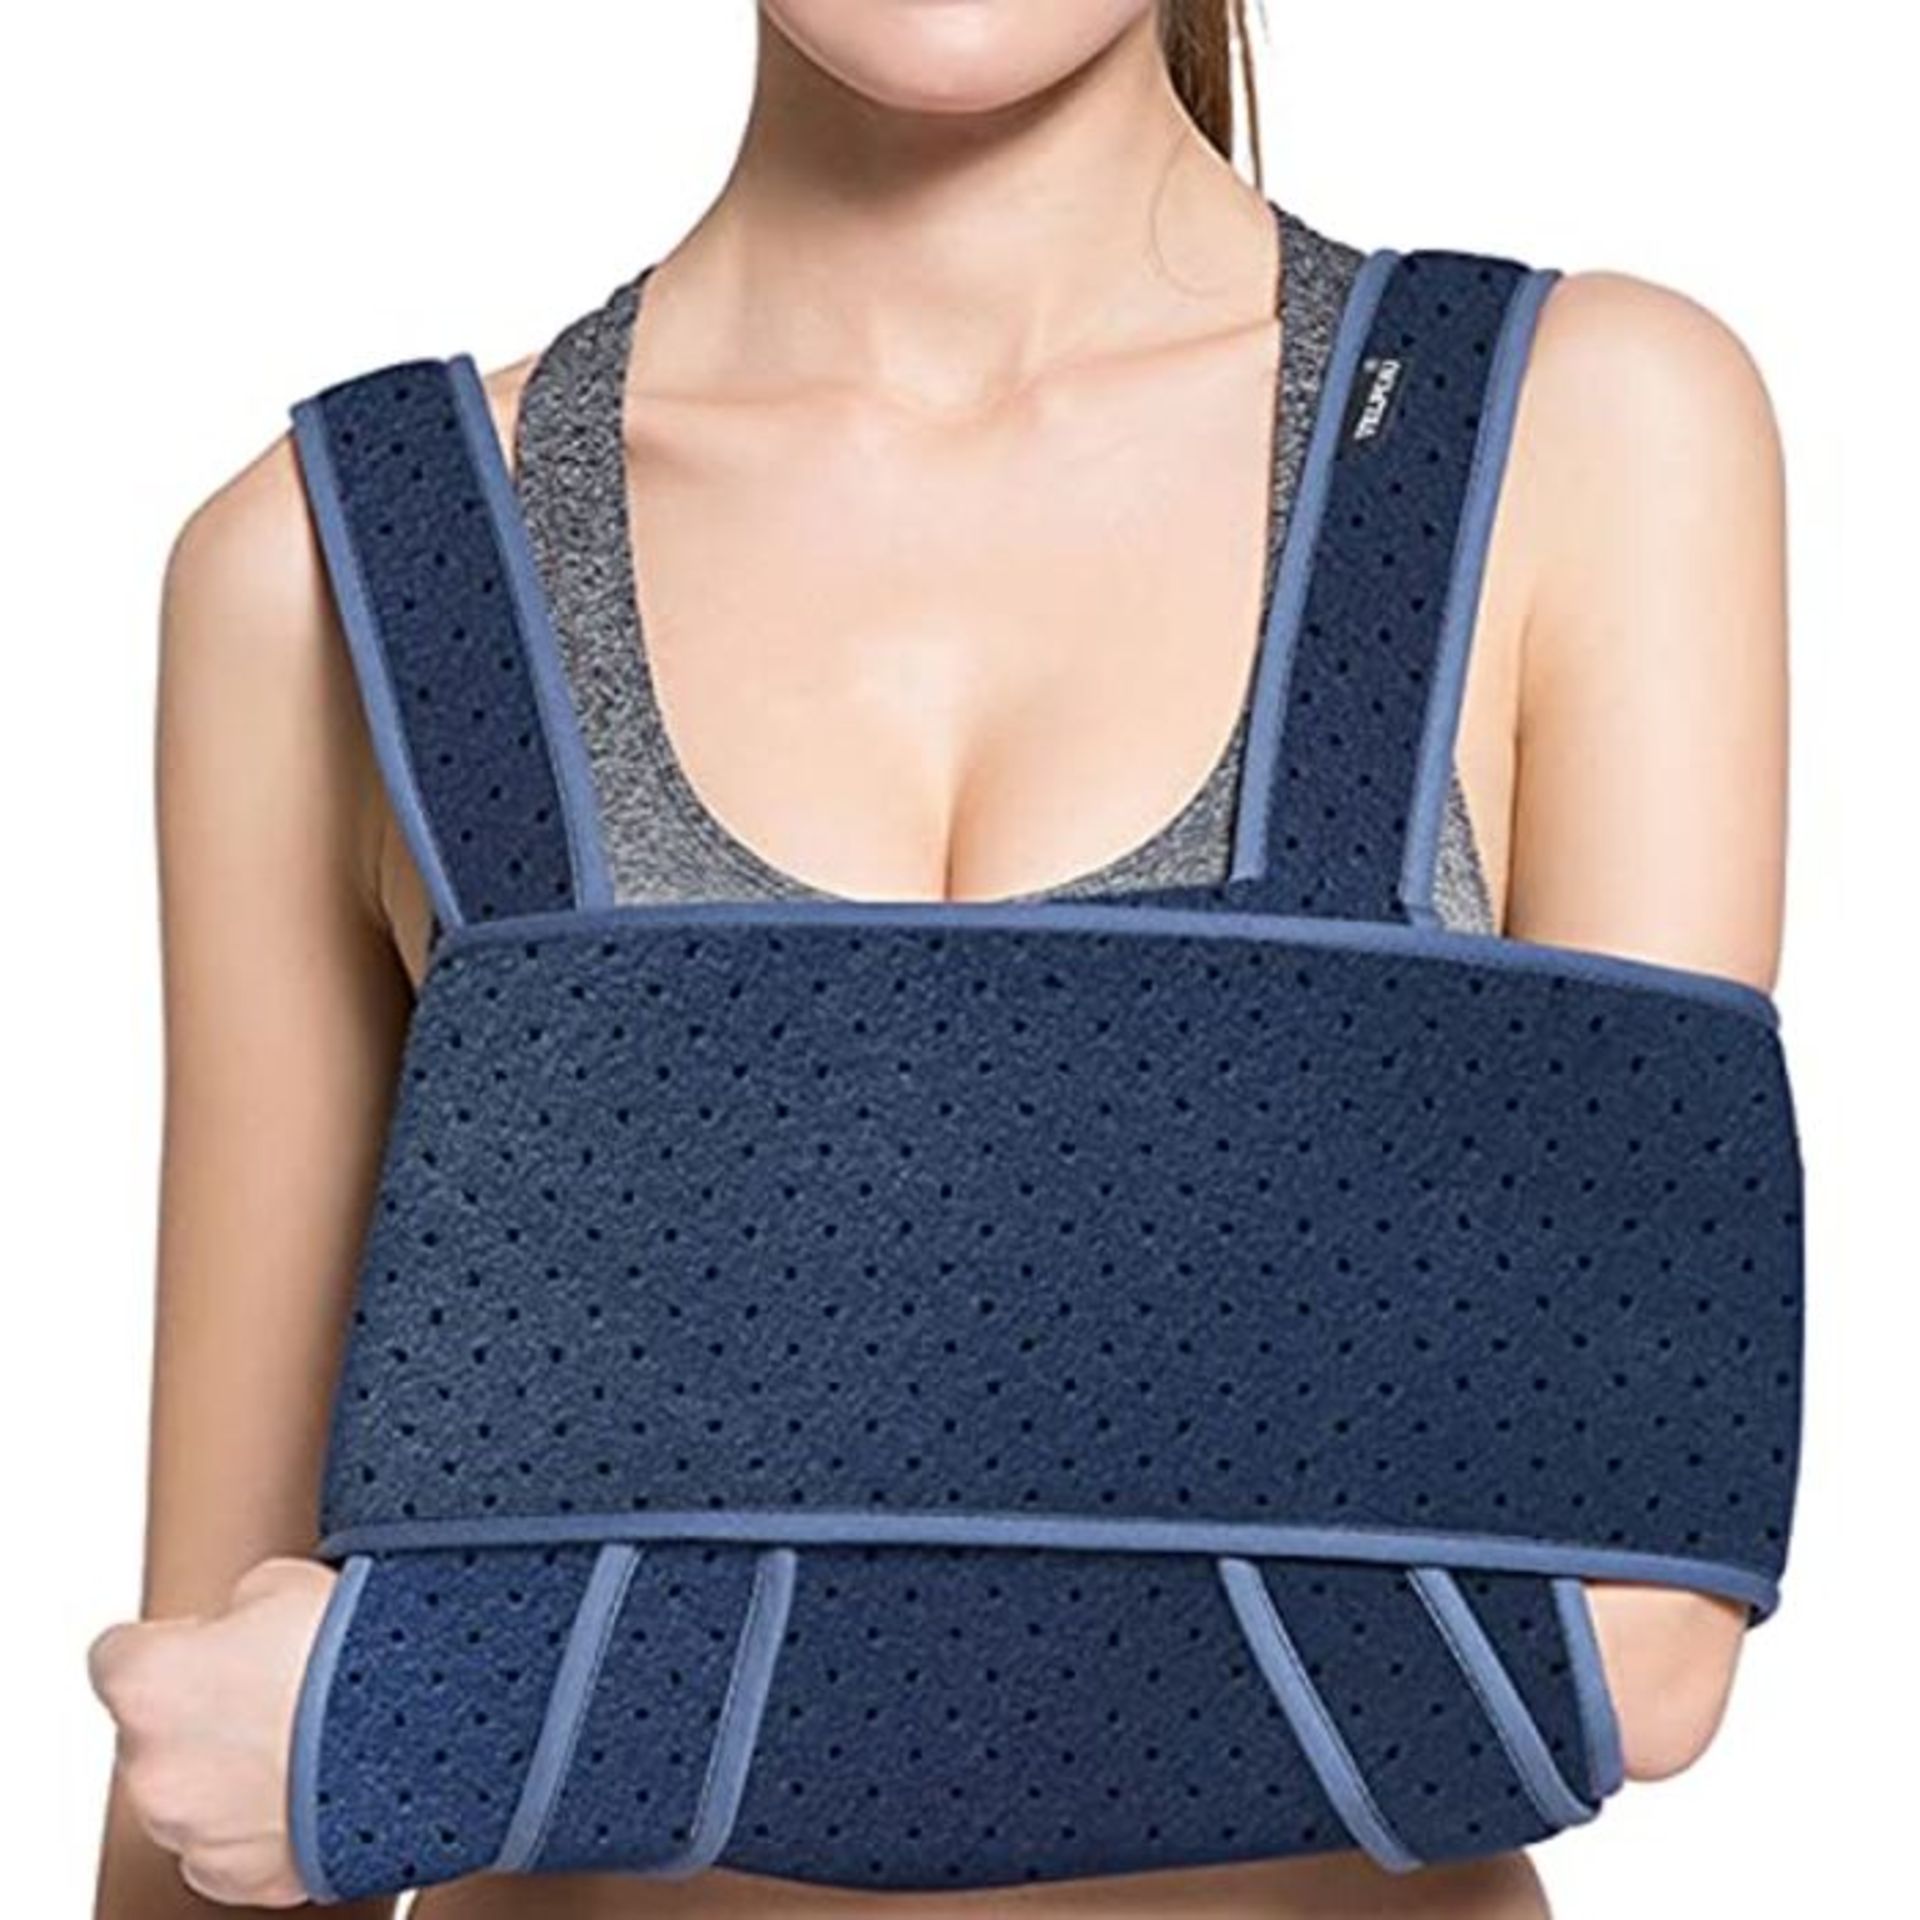 Velpeau Arm Sling Shoulder Immobilizer - Can Be Used During Sleep - Rotator Cuff Suppo